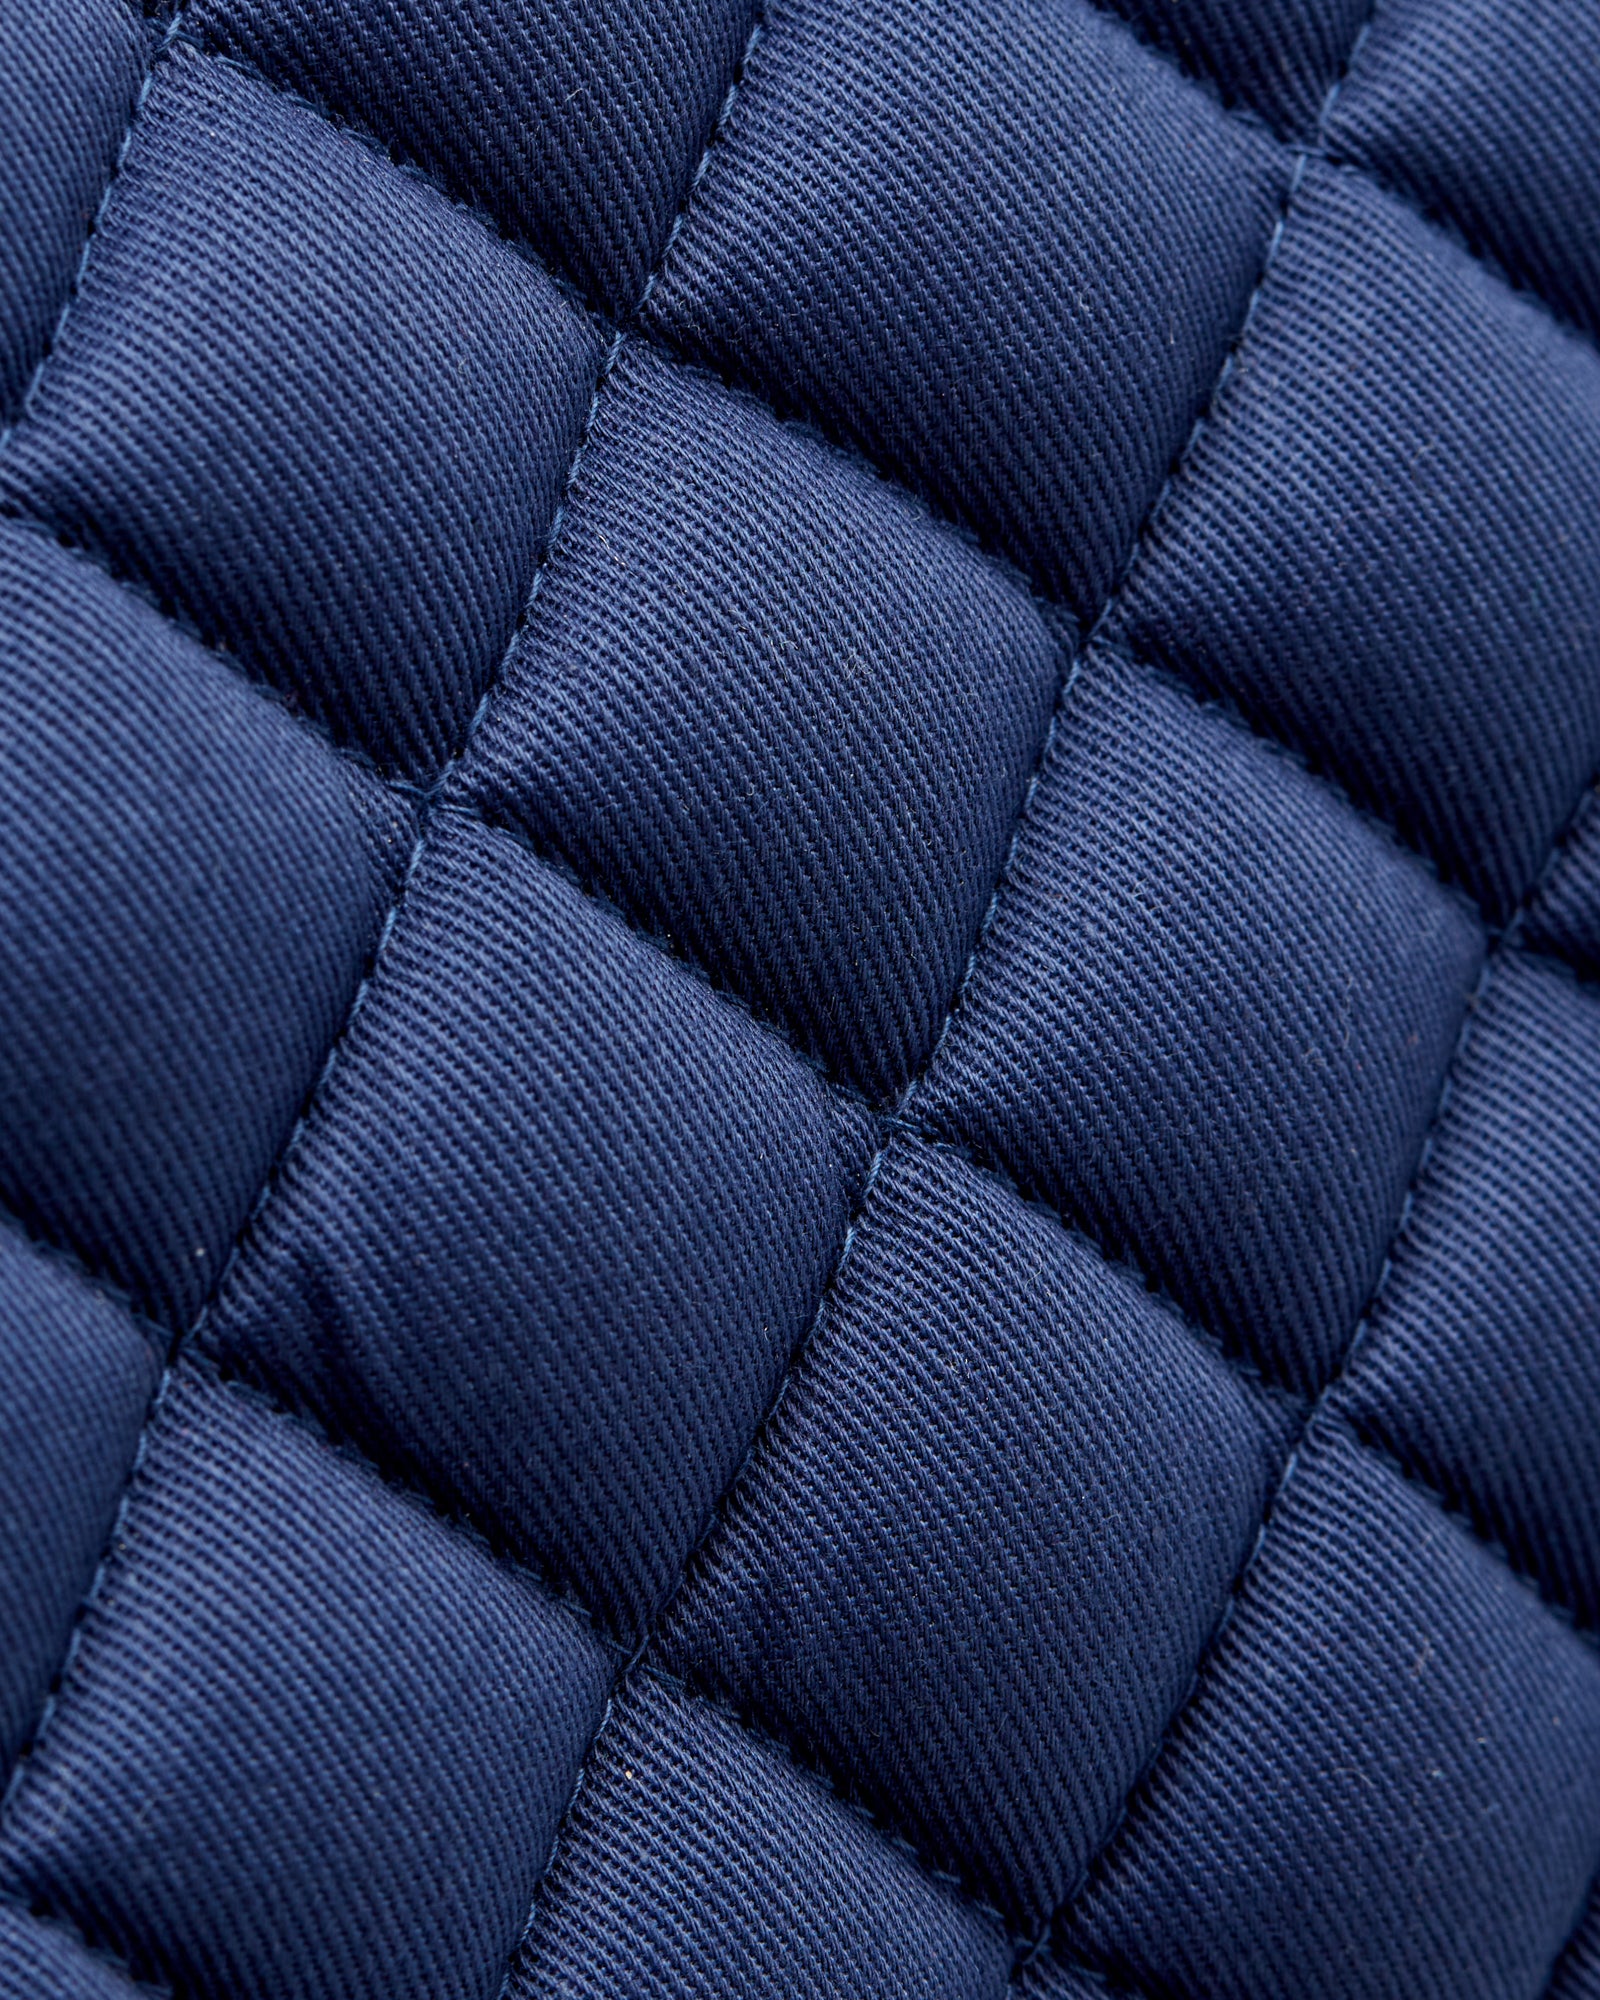 Equestrian Navy quilted jumping saddle pad/numnahs.